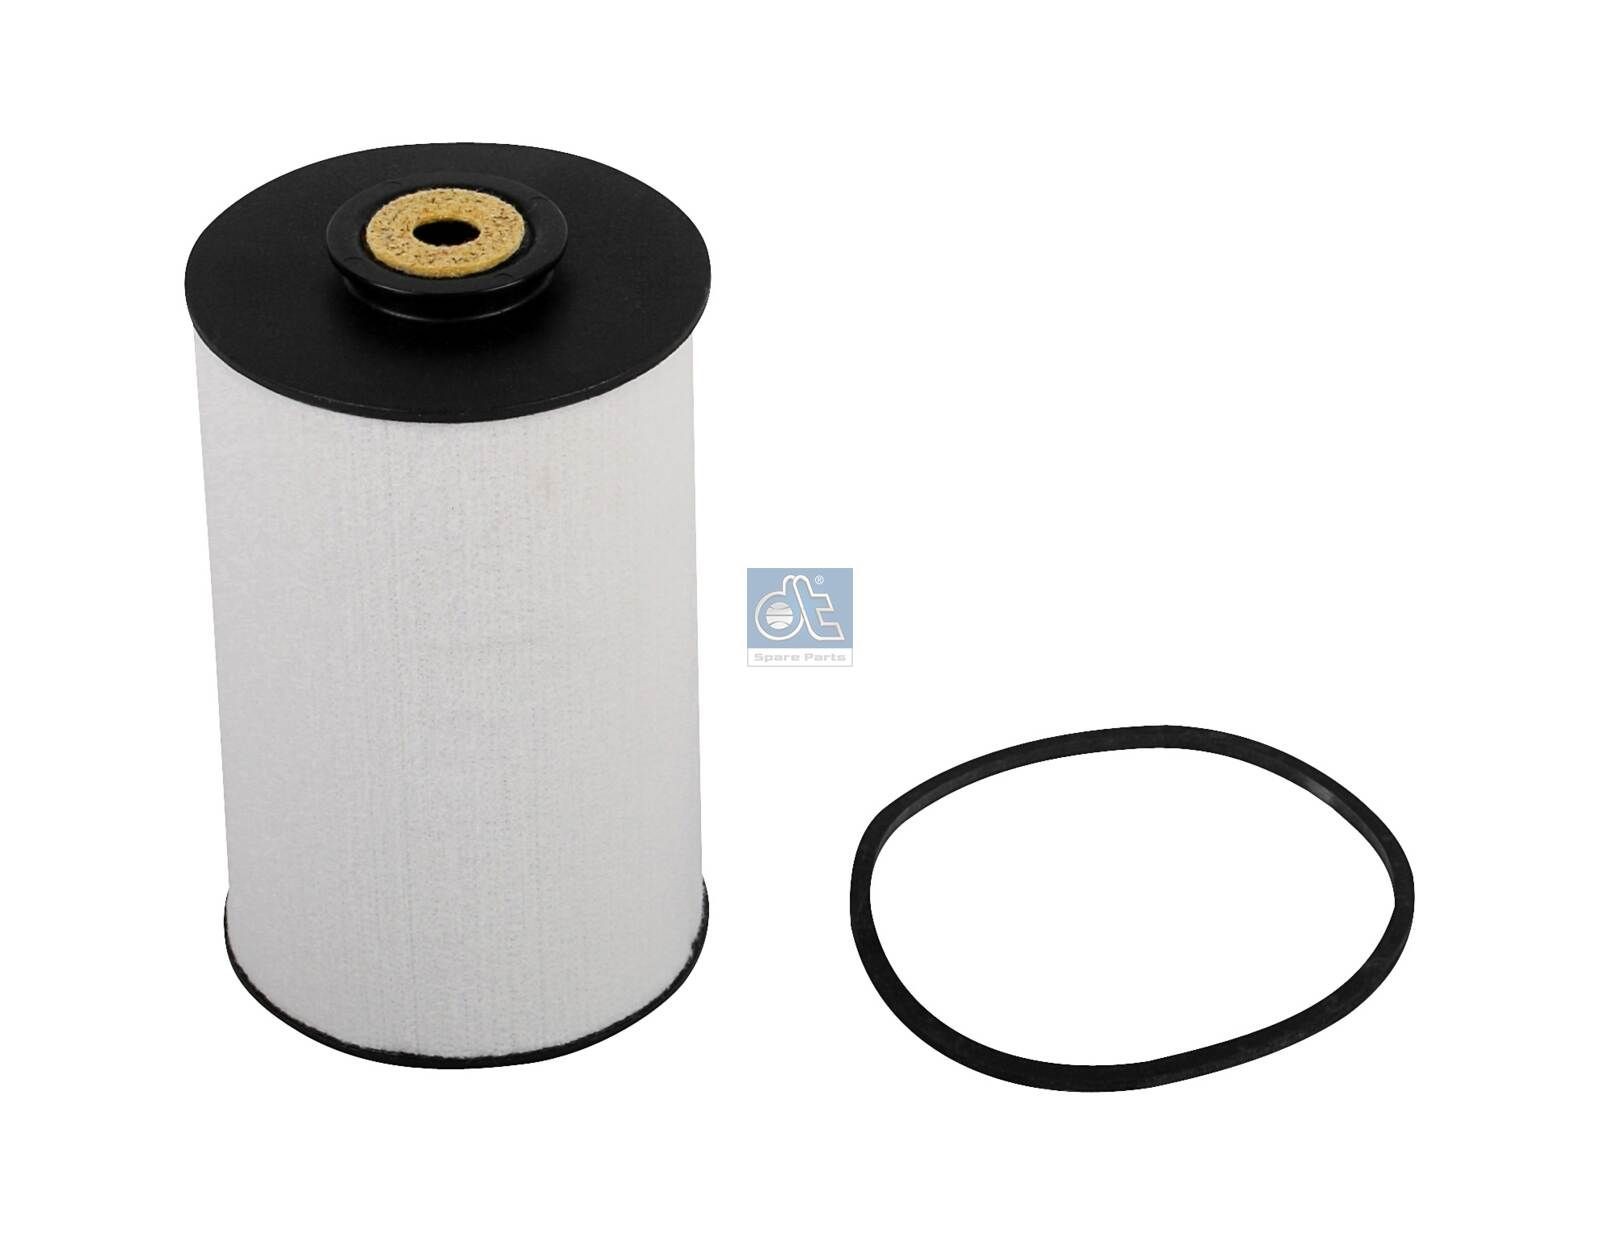 BFU 900 x DT Spare Parts 4.61531 Fuel filter 422 092 0105